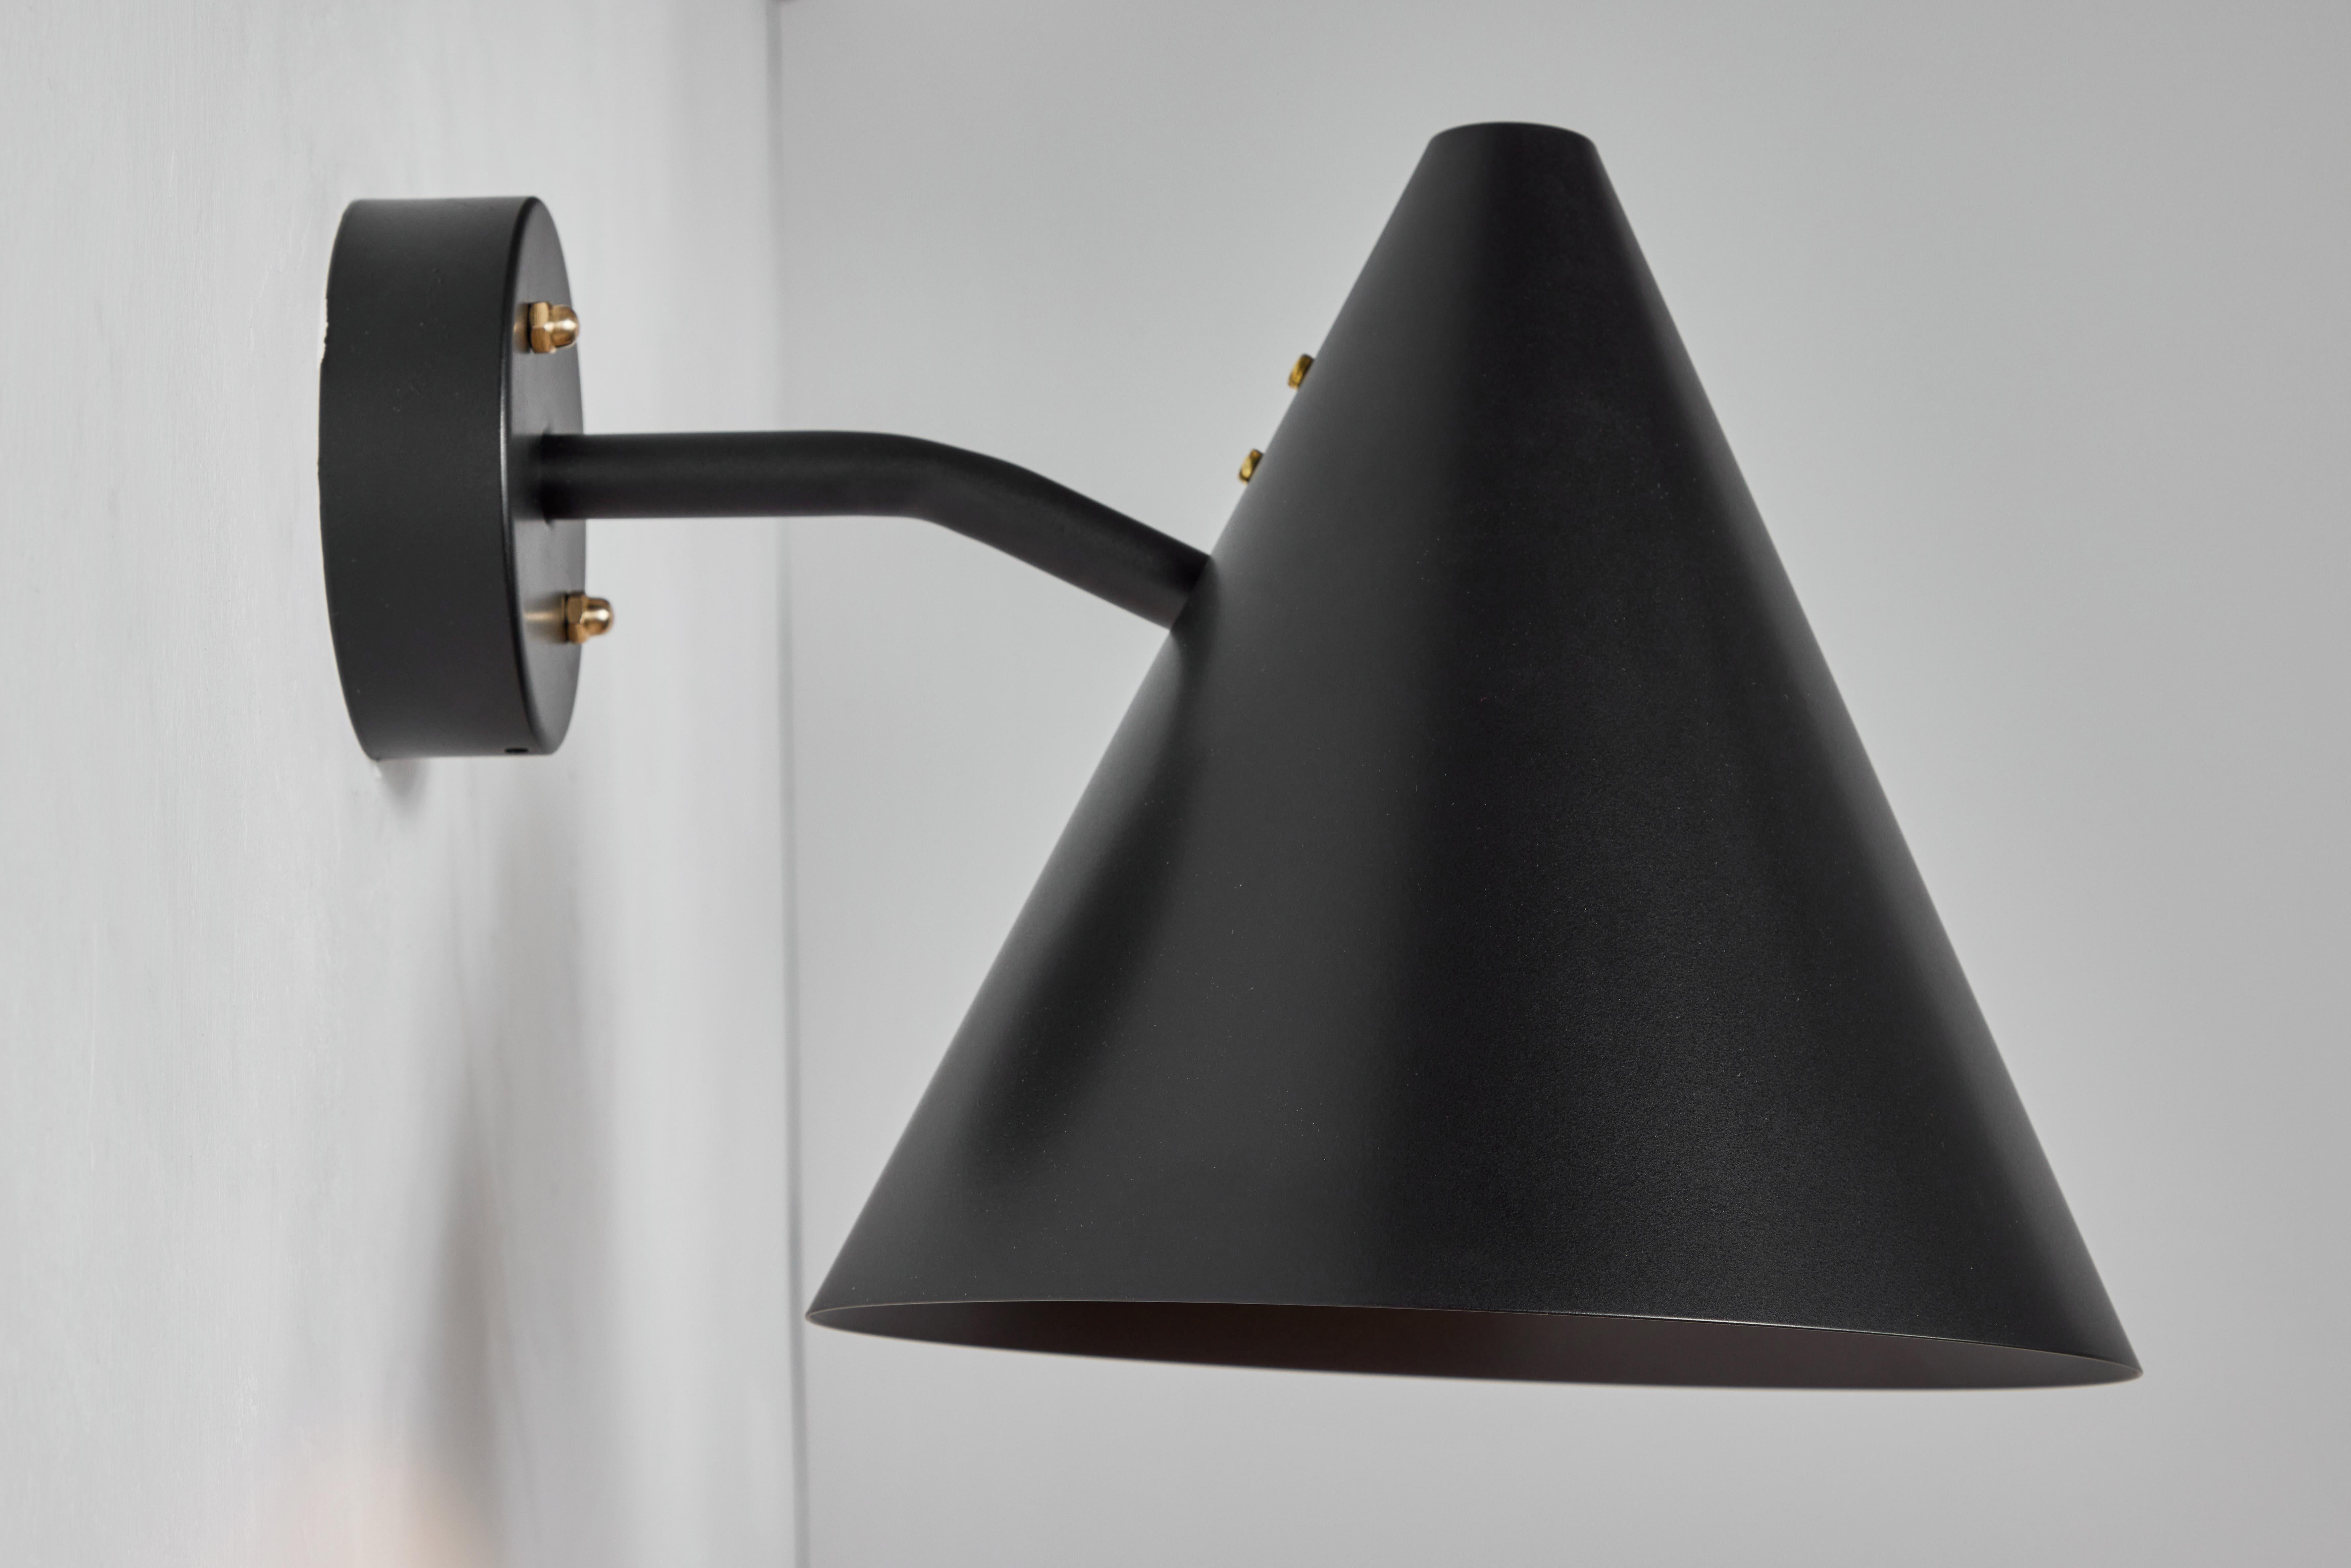 Pair of Hans-Agne Jakobsson 'Tratten' outdoor sconces in black. 

An exclusive made for U.S. + UL listed authorized re-edition of the classic Swedish design executed in black painted metal shade with black painted interior and brass hardware.